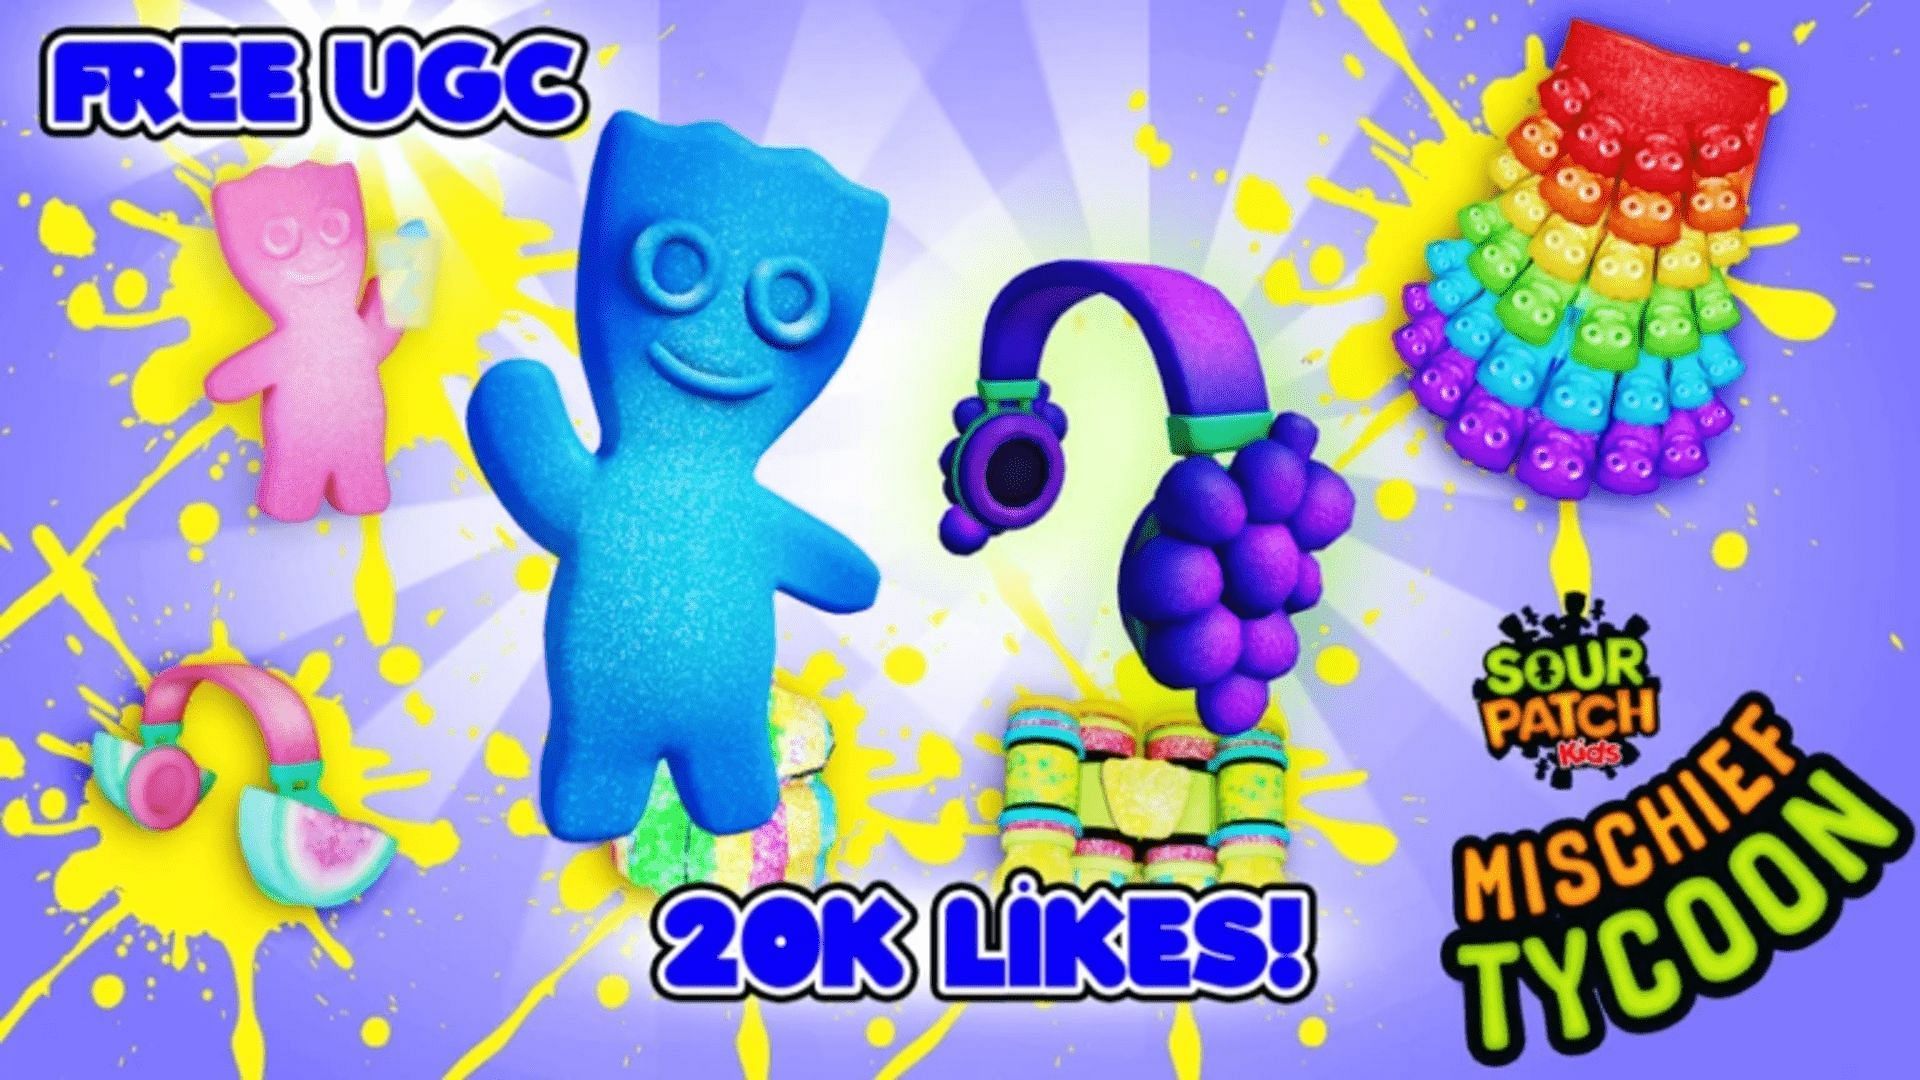 Sour Patch Kids Mischief Tycoon UGC Quests Guide